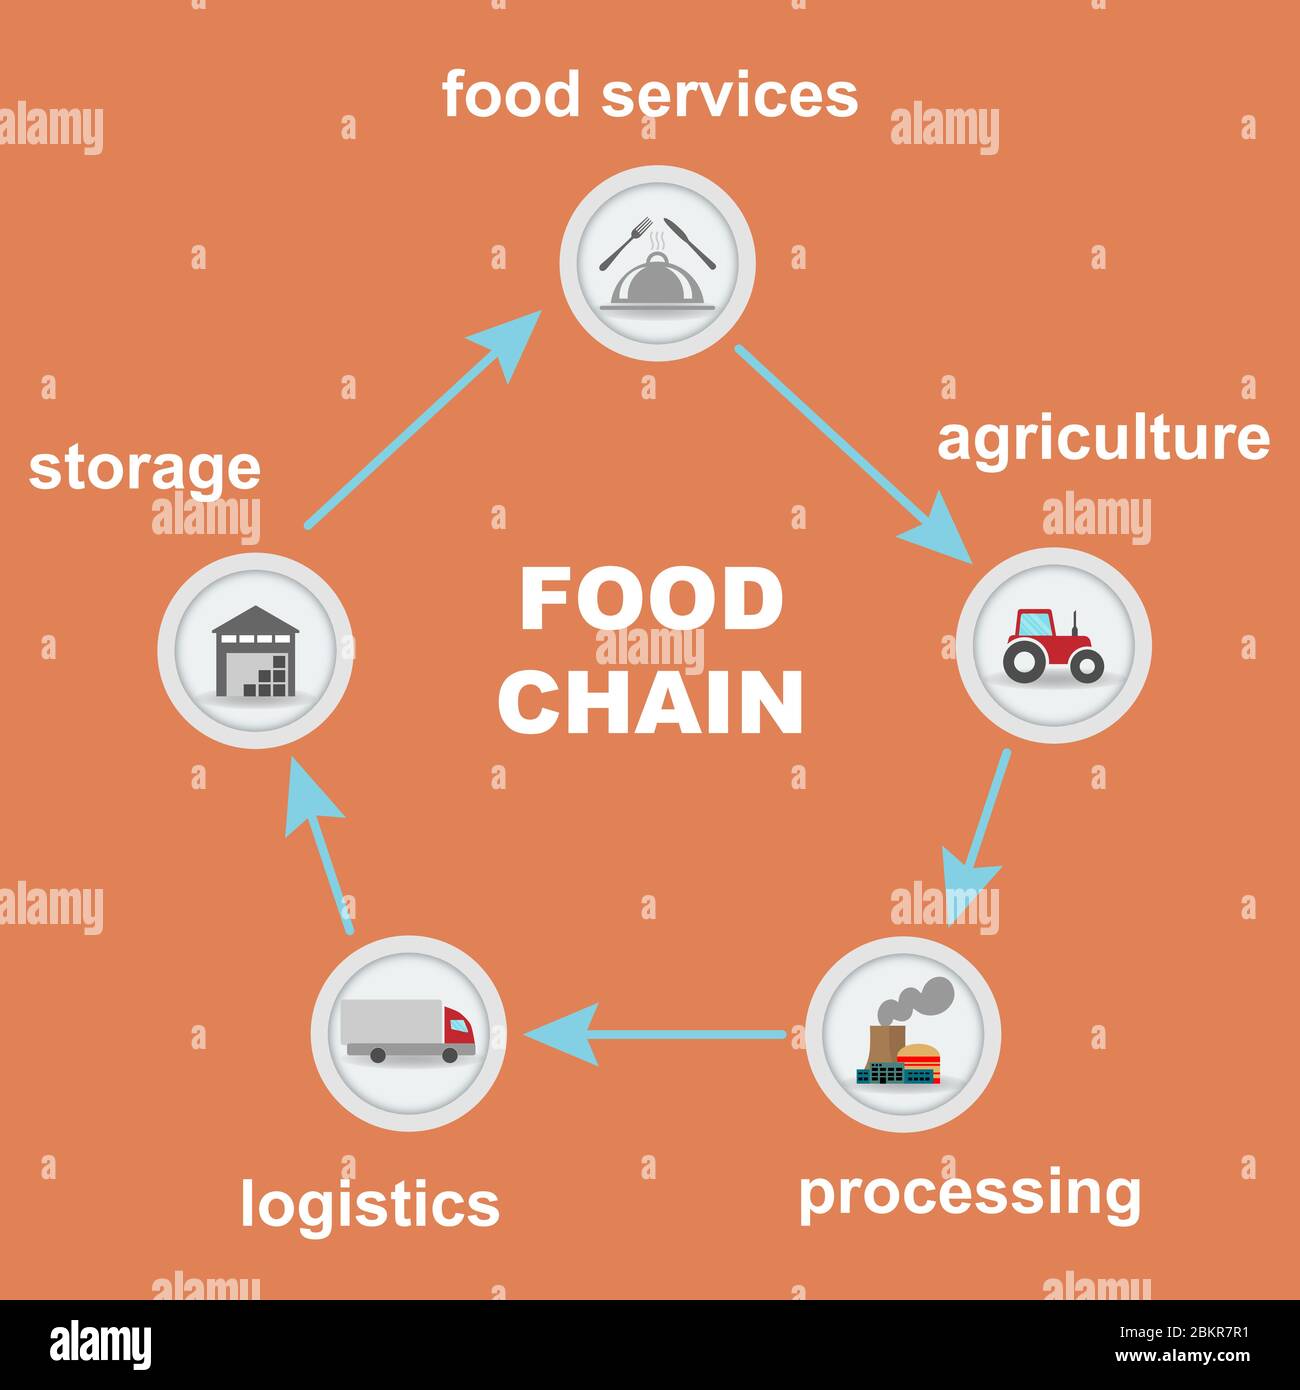 Different food chain stages interconnected Stock Vector